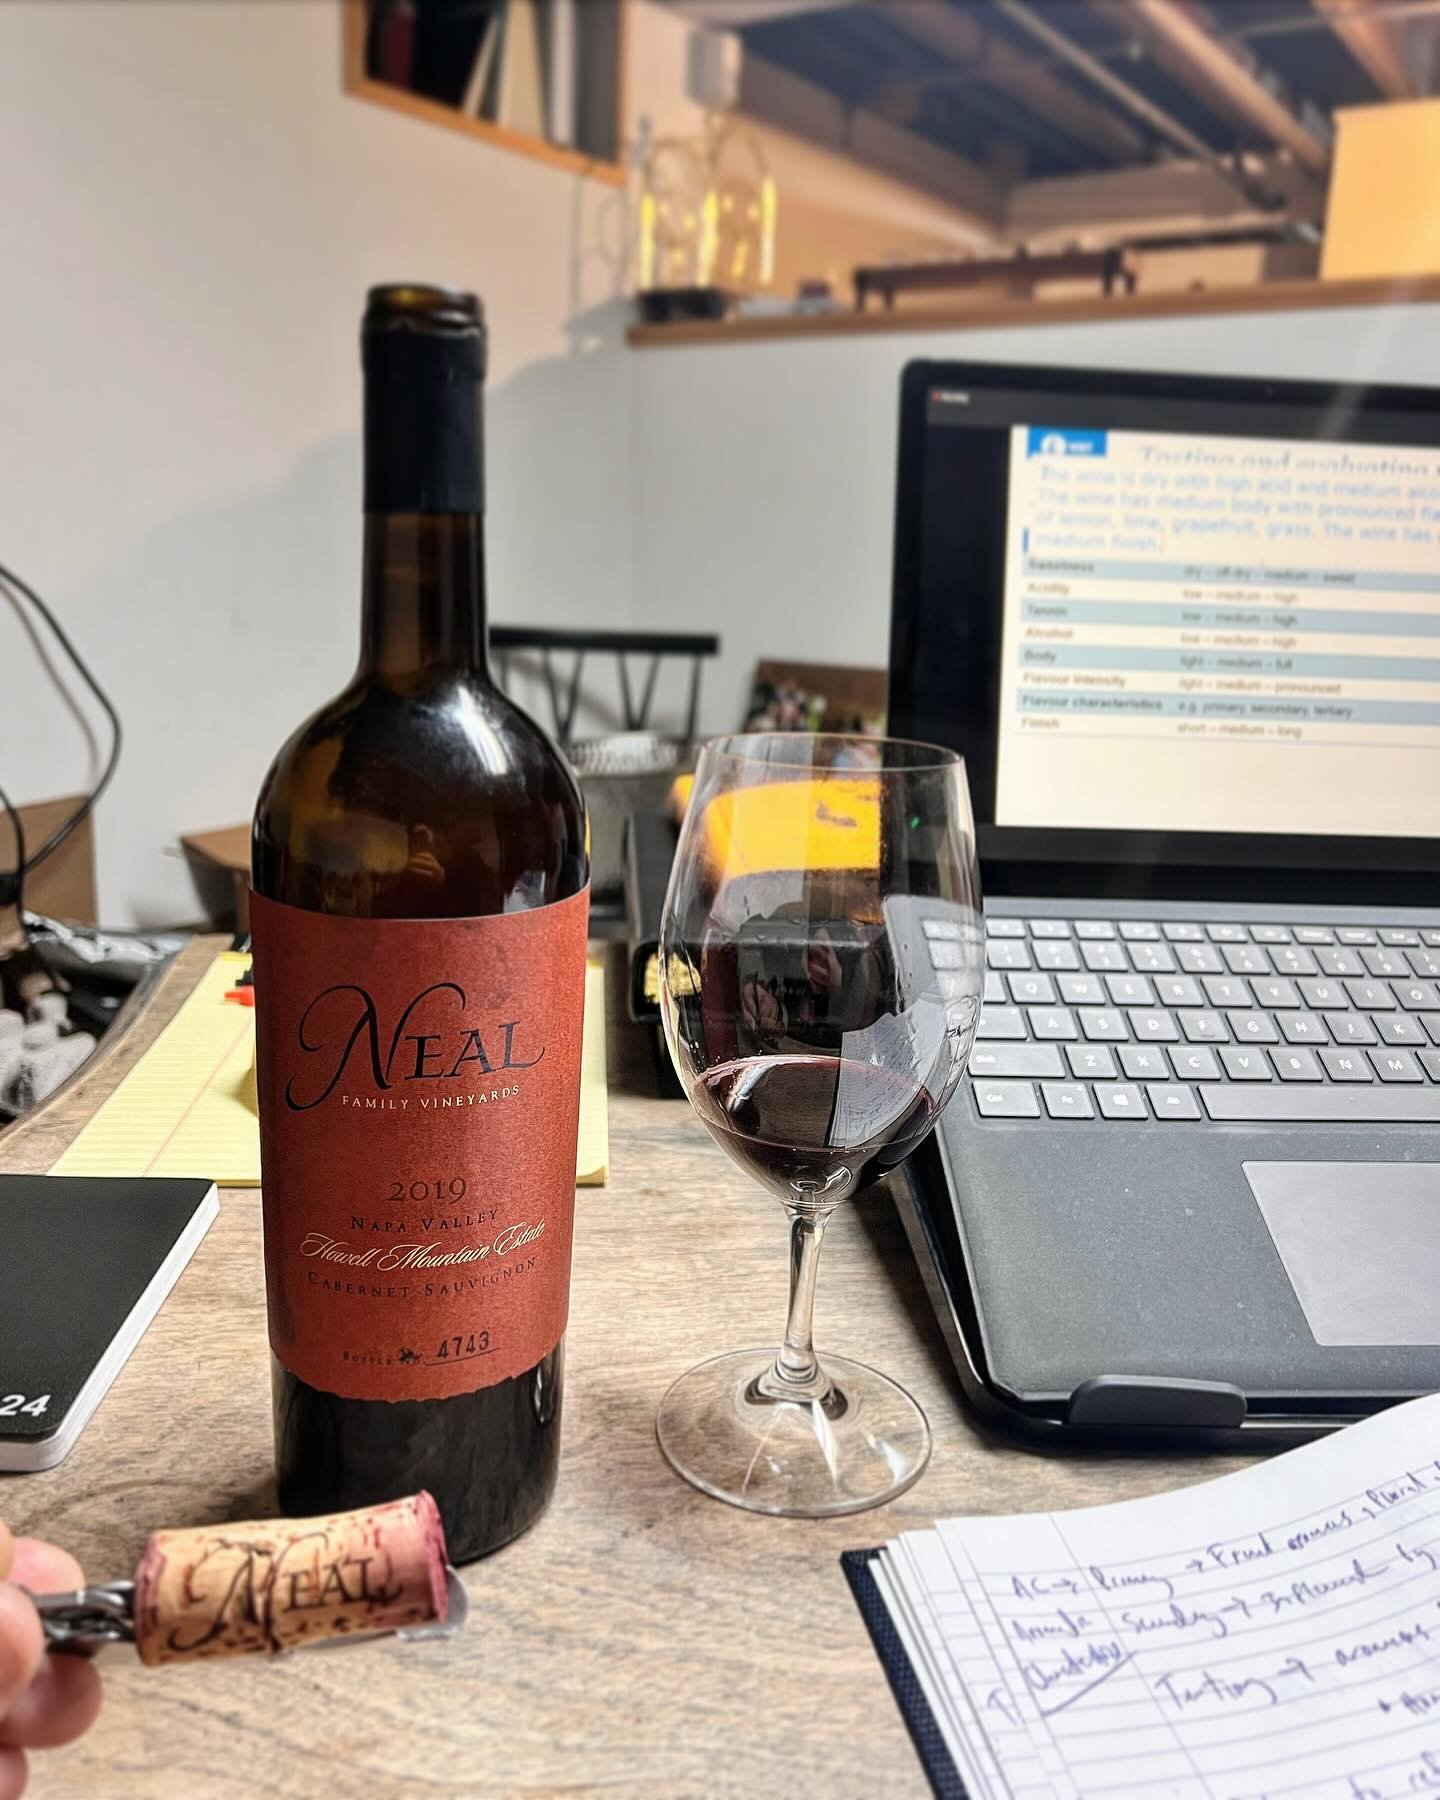 Going back to school with the @americanwineschool and @wsetglobal to finally earn my WSET 2 Certification in Wine. What better way to hit to books than with a glass of the 2019 Howell Mountain Estate Cabernet Sauvignon from @nealvineyards alongside f